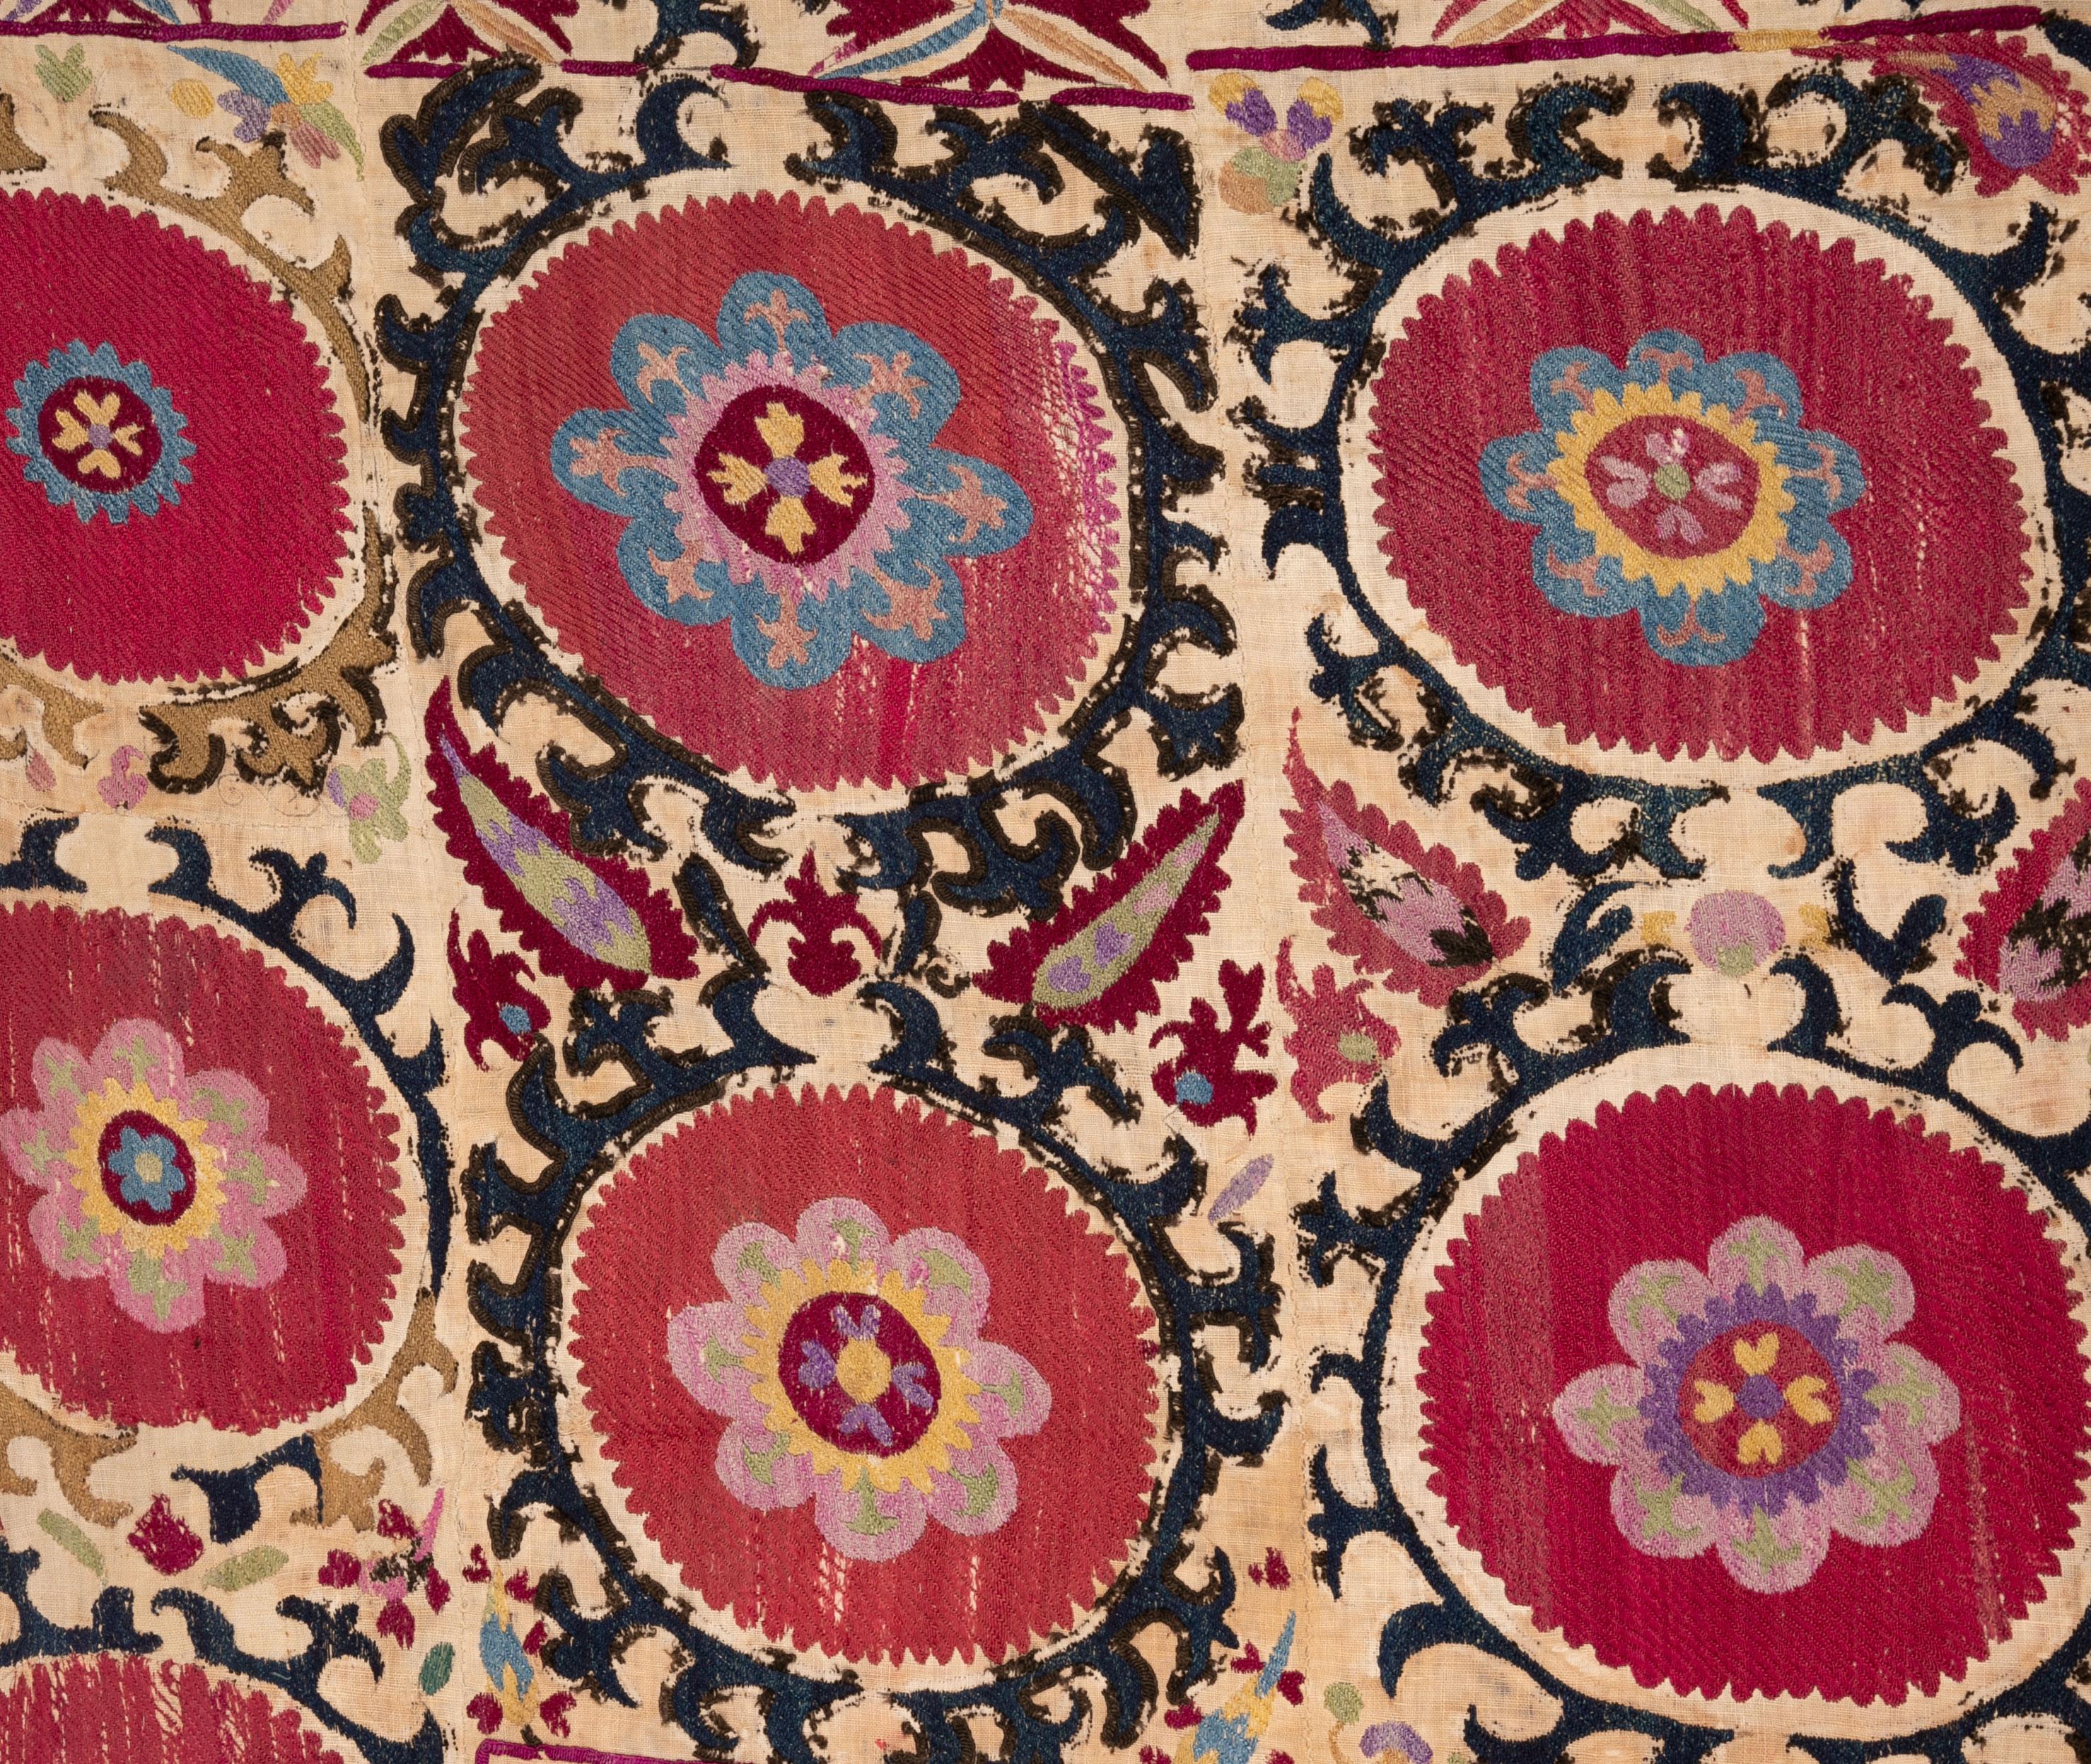 Embroidered Antique Suzani from Tajikistan, Central Asia, Late 19th Century